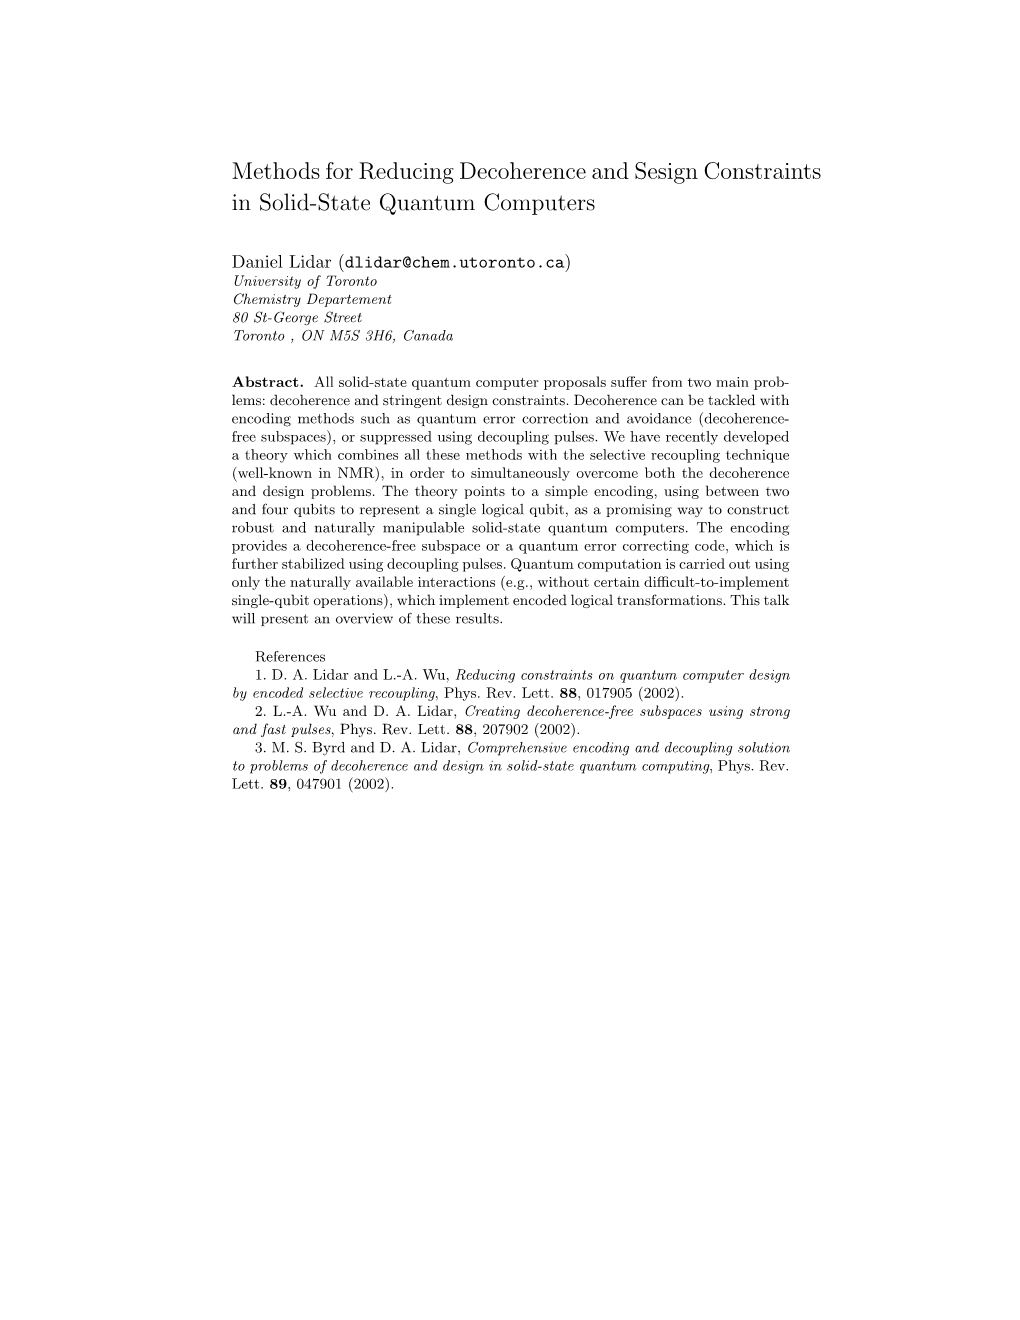 Methods for Reducing Decoherence and Sesign Constraints in Solid-State Quantum Computers